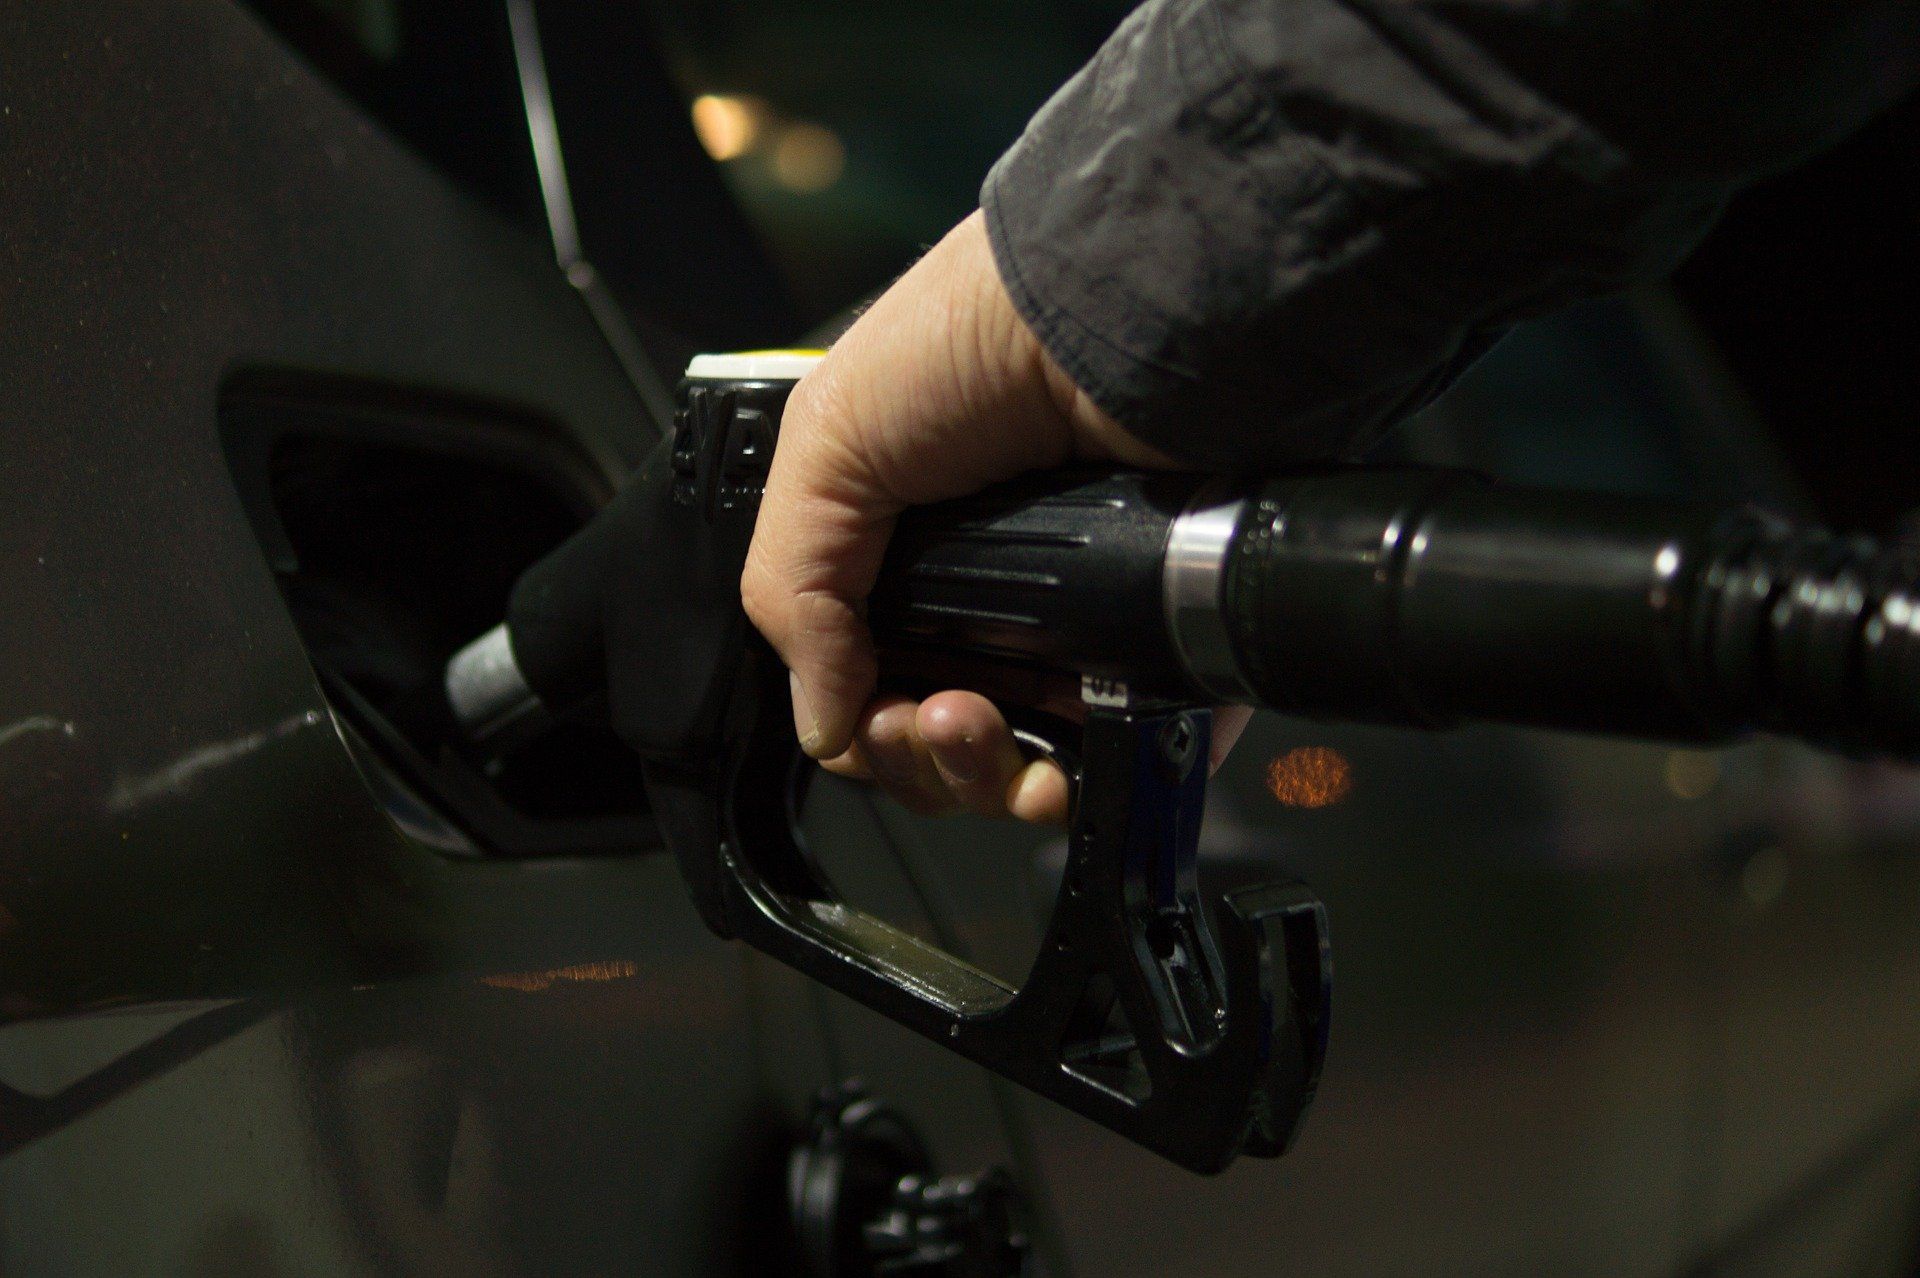 Fuel price today: Petrol and Diesel rates remain unchanged on May 4, 2022